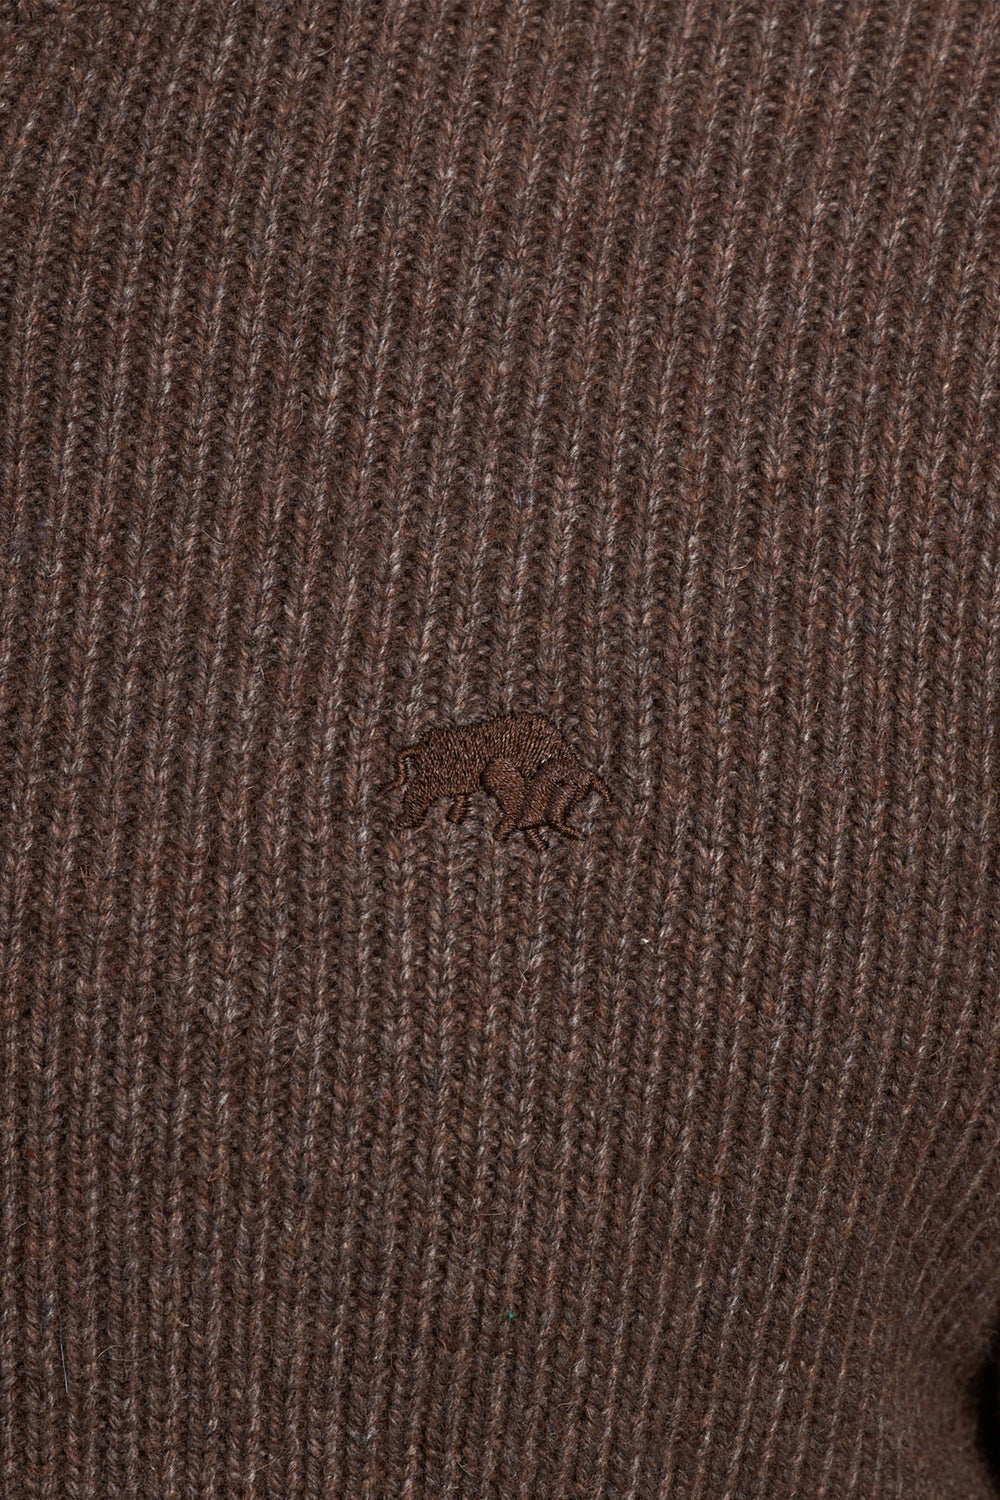 Chunky Button Up Knit - Chocolate